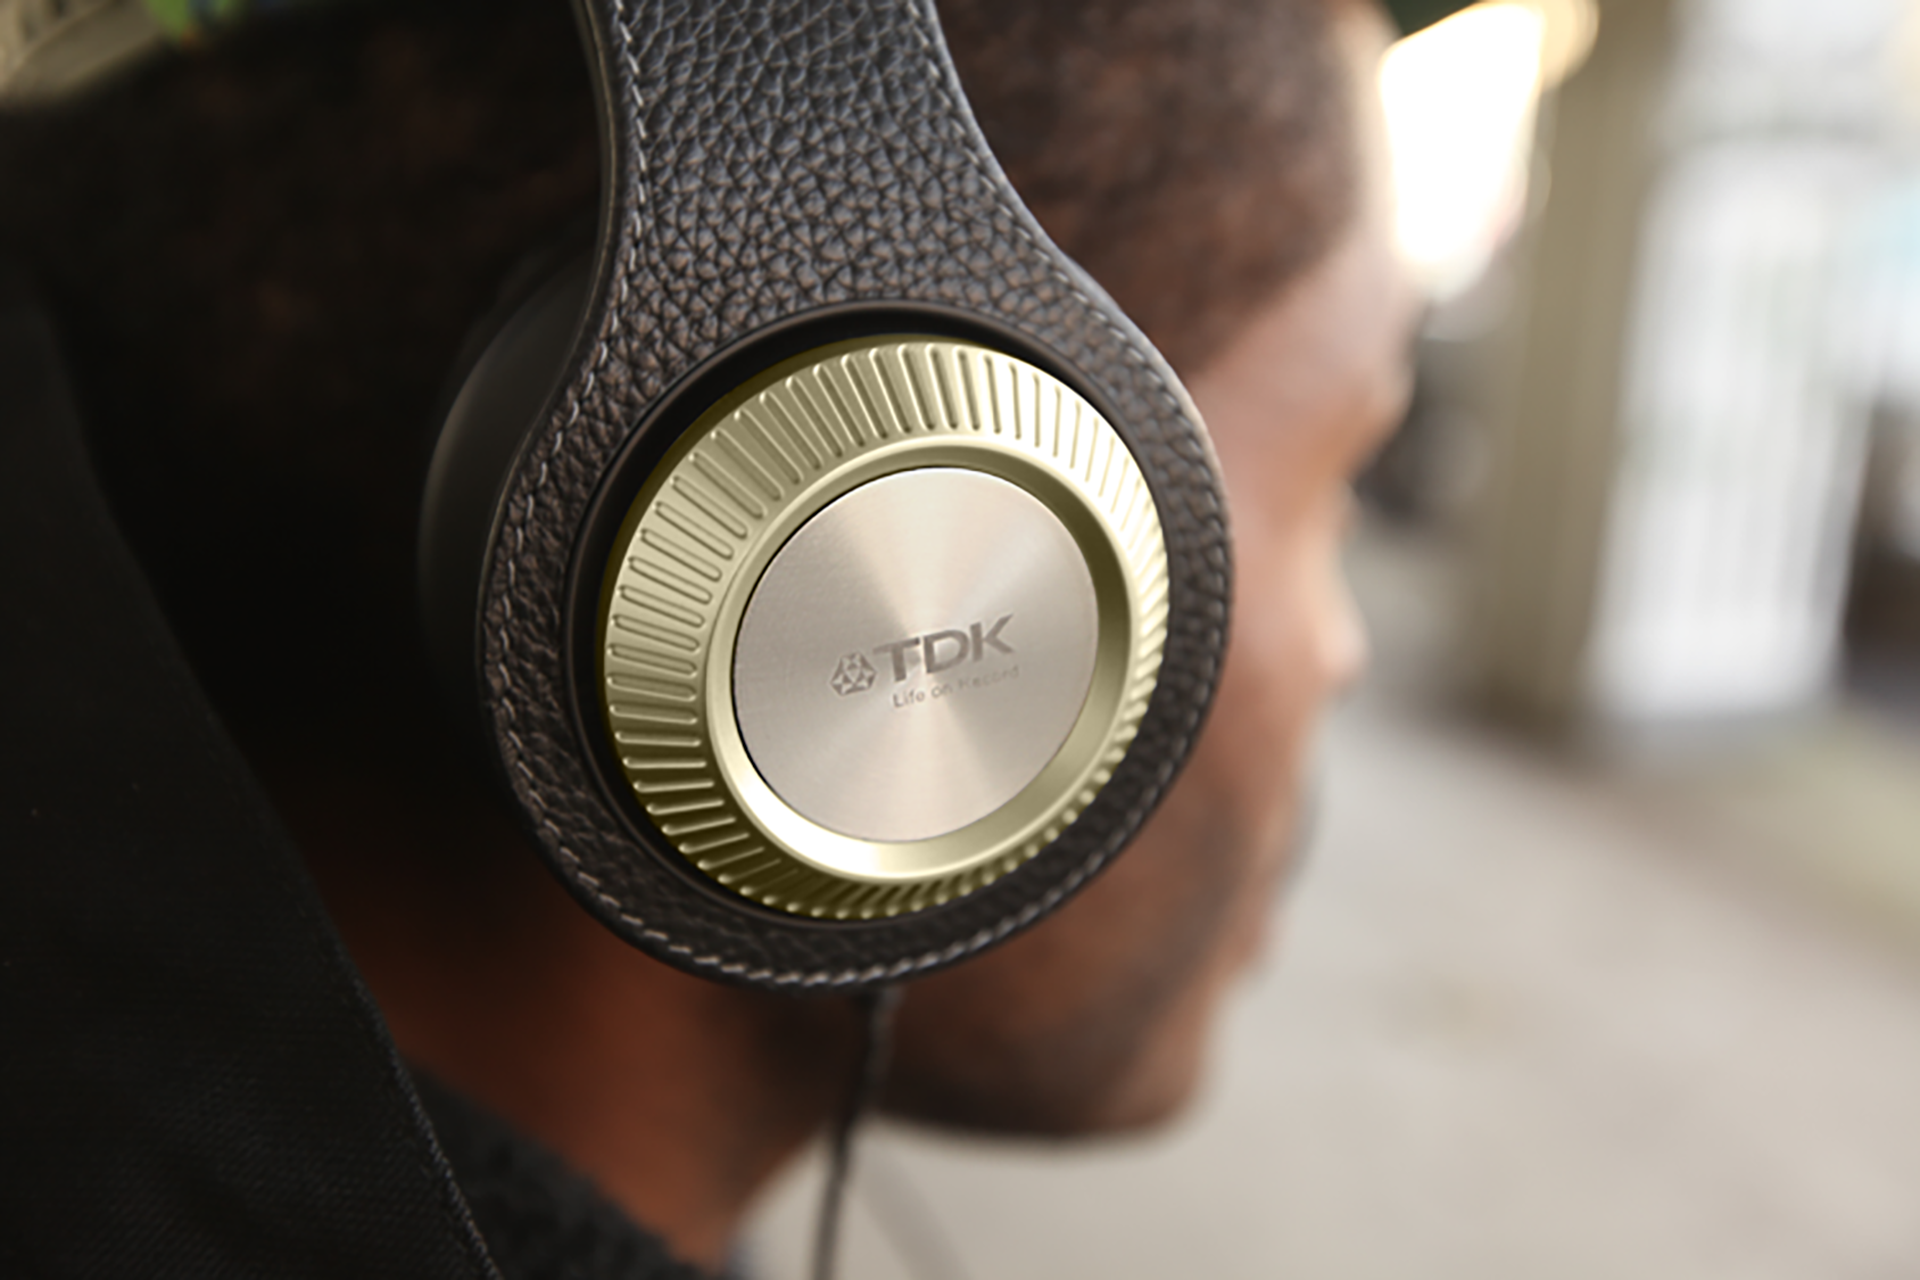 Person wearing black leather over-ear headphones that has a gold ear cover labled “TDK, Life on Record”